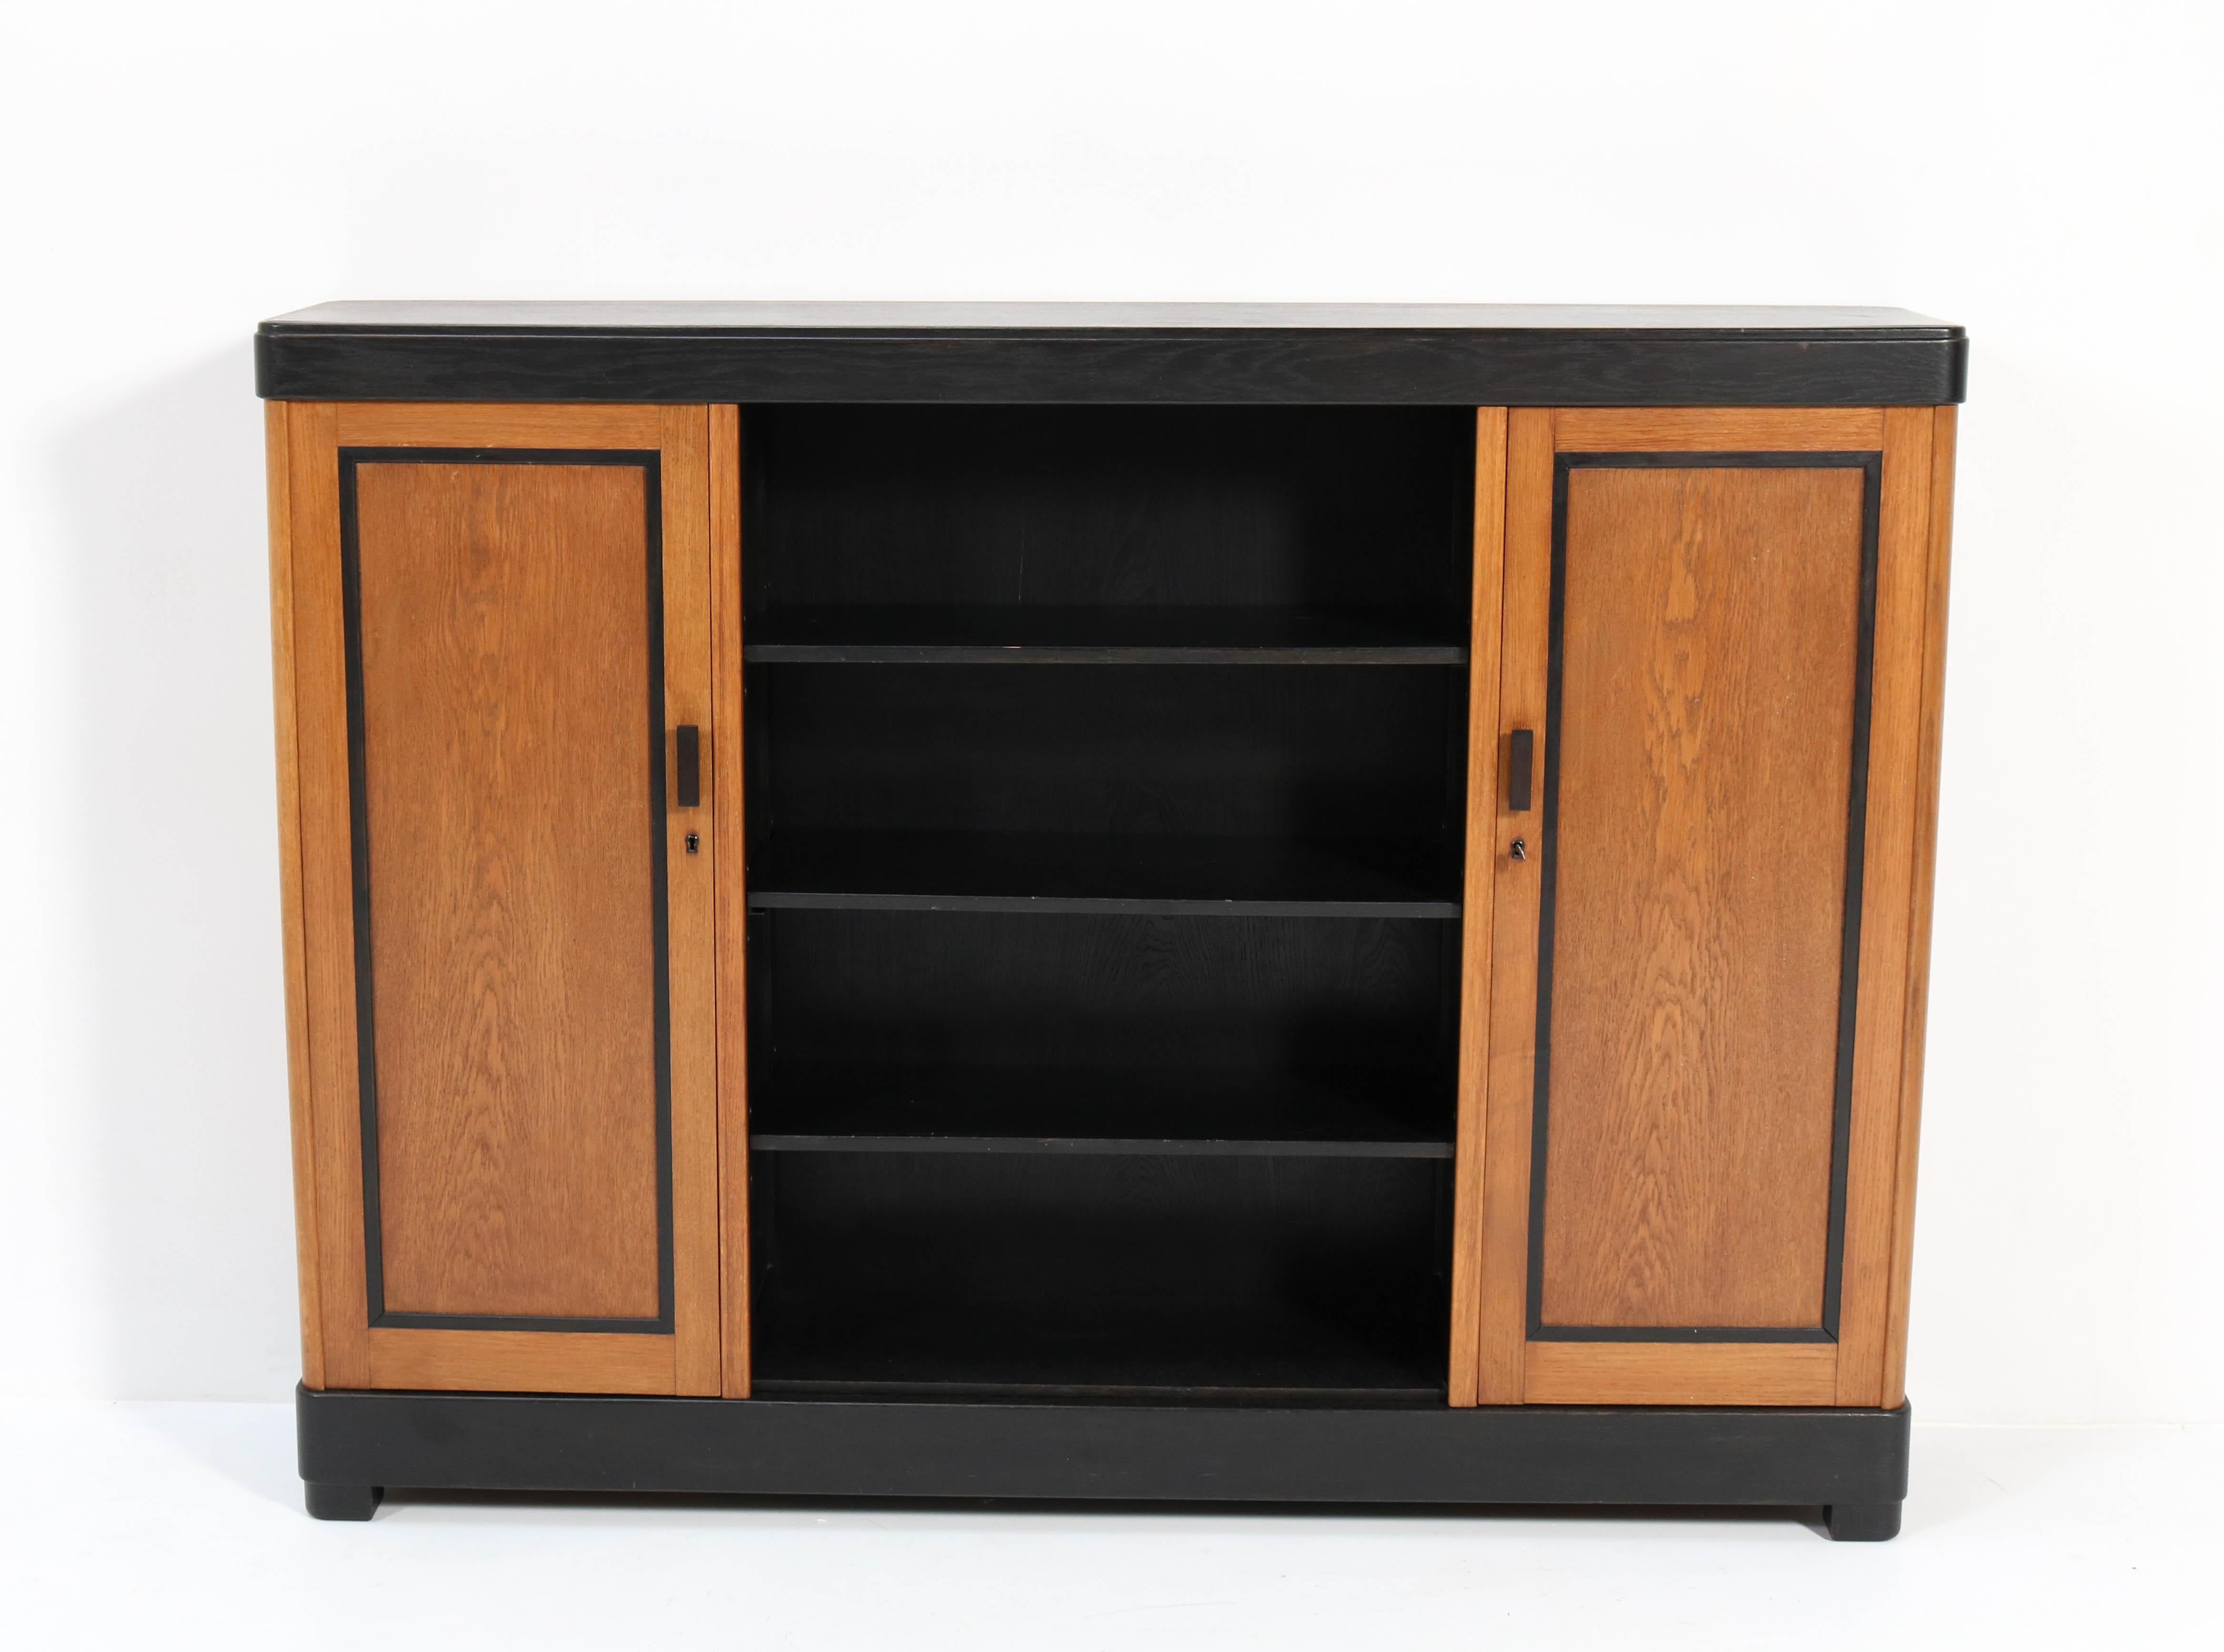 Wonderful and rare Art Deco Haagse School bookcase.
Design by Frits Spanjaard for L.O.V. Oosterbeek.
Striking Dutch design from the twenties.
Solid oak with original black lacquered handles and lining.
This wonderful piece of furniture can be